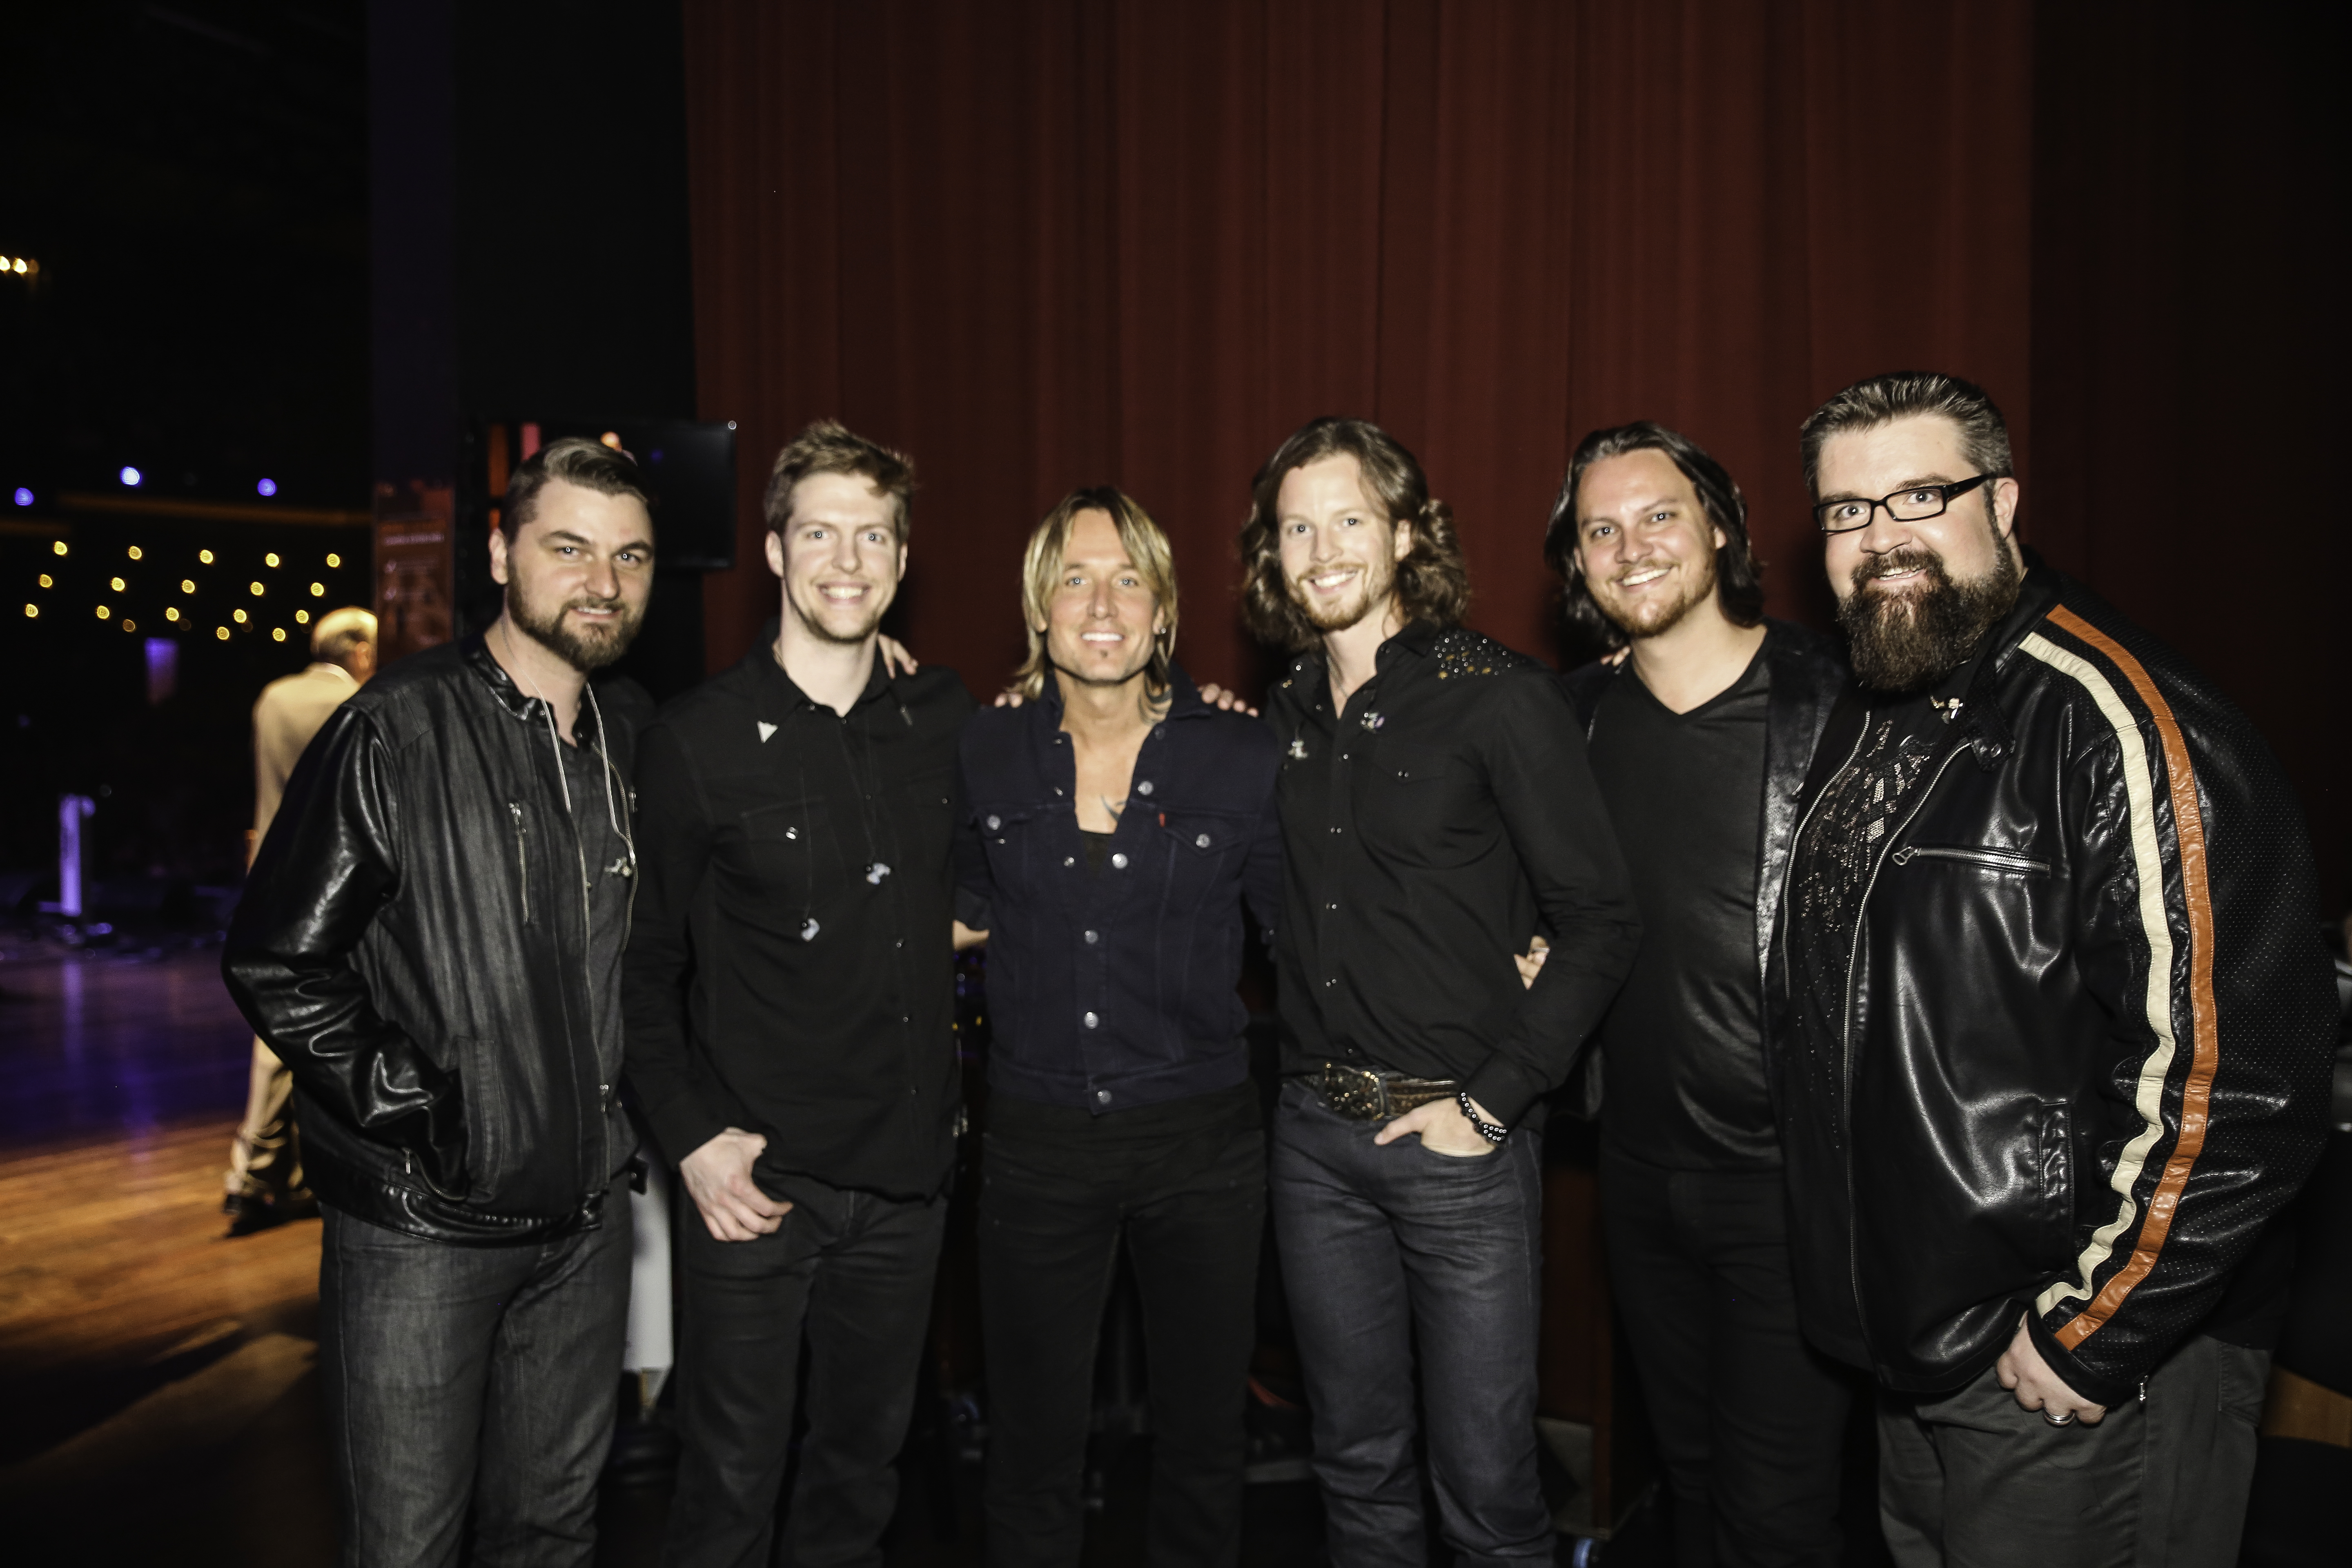 Home Free Receives Standing Ovation After Teaming Up with The Oak Ridge Boys for “Elvira”